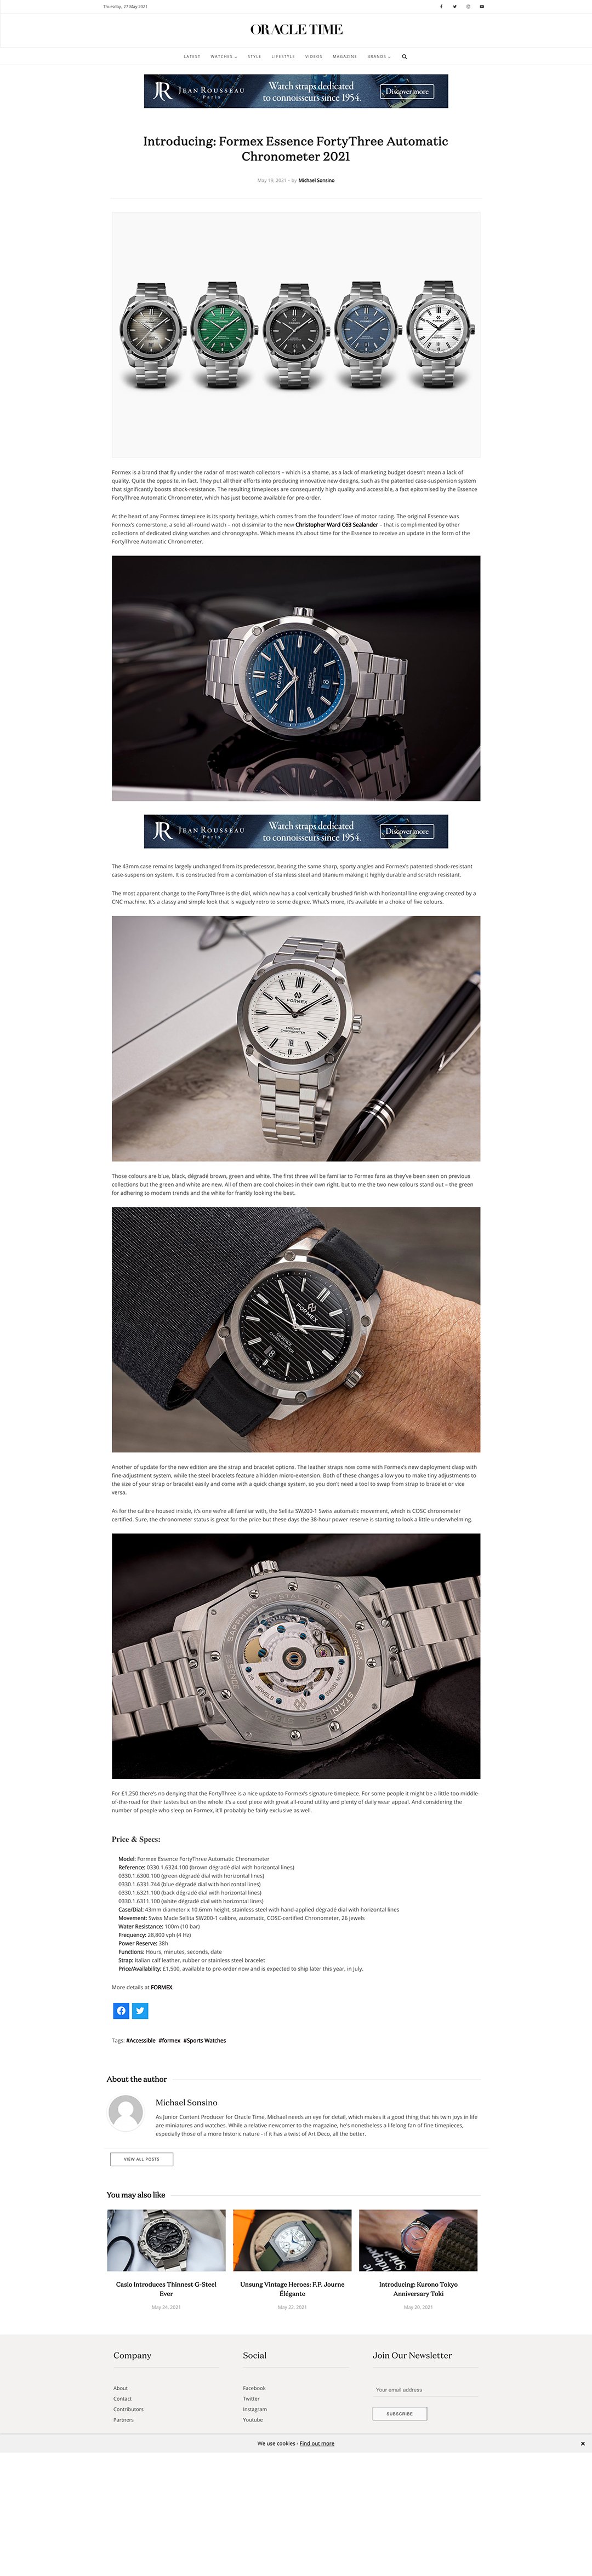 oracle article featuring formex swiss watches